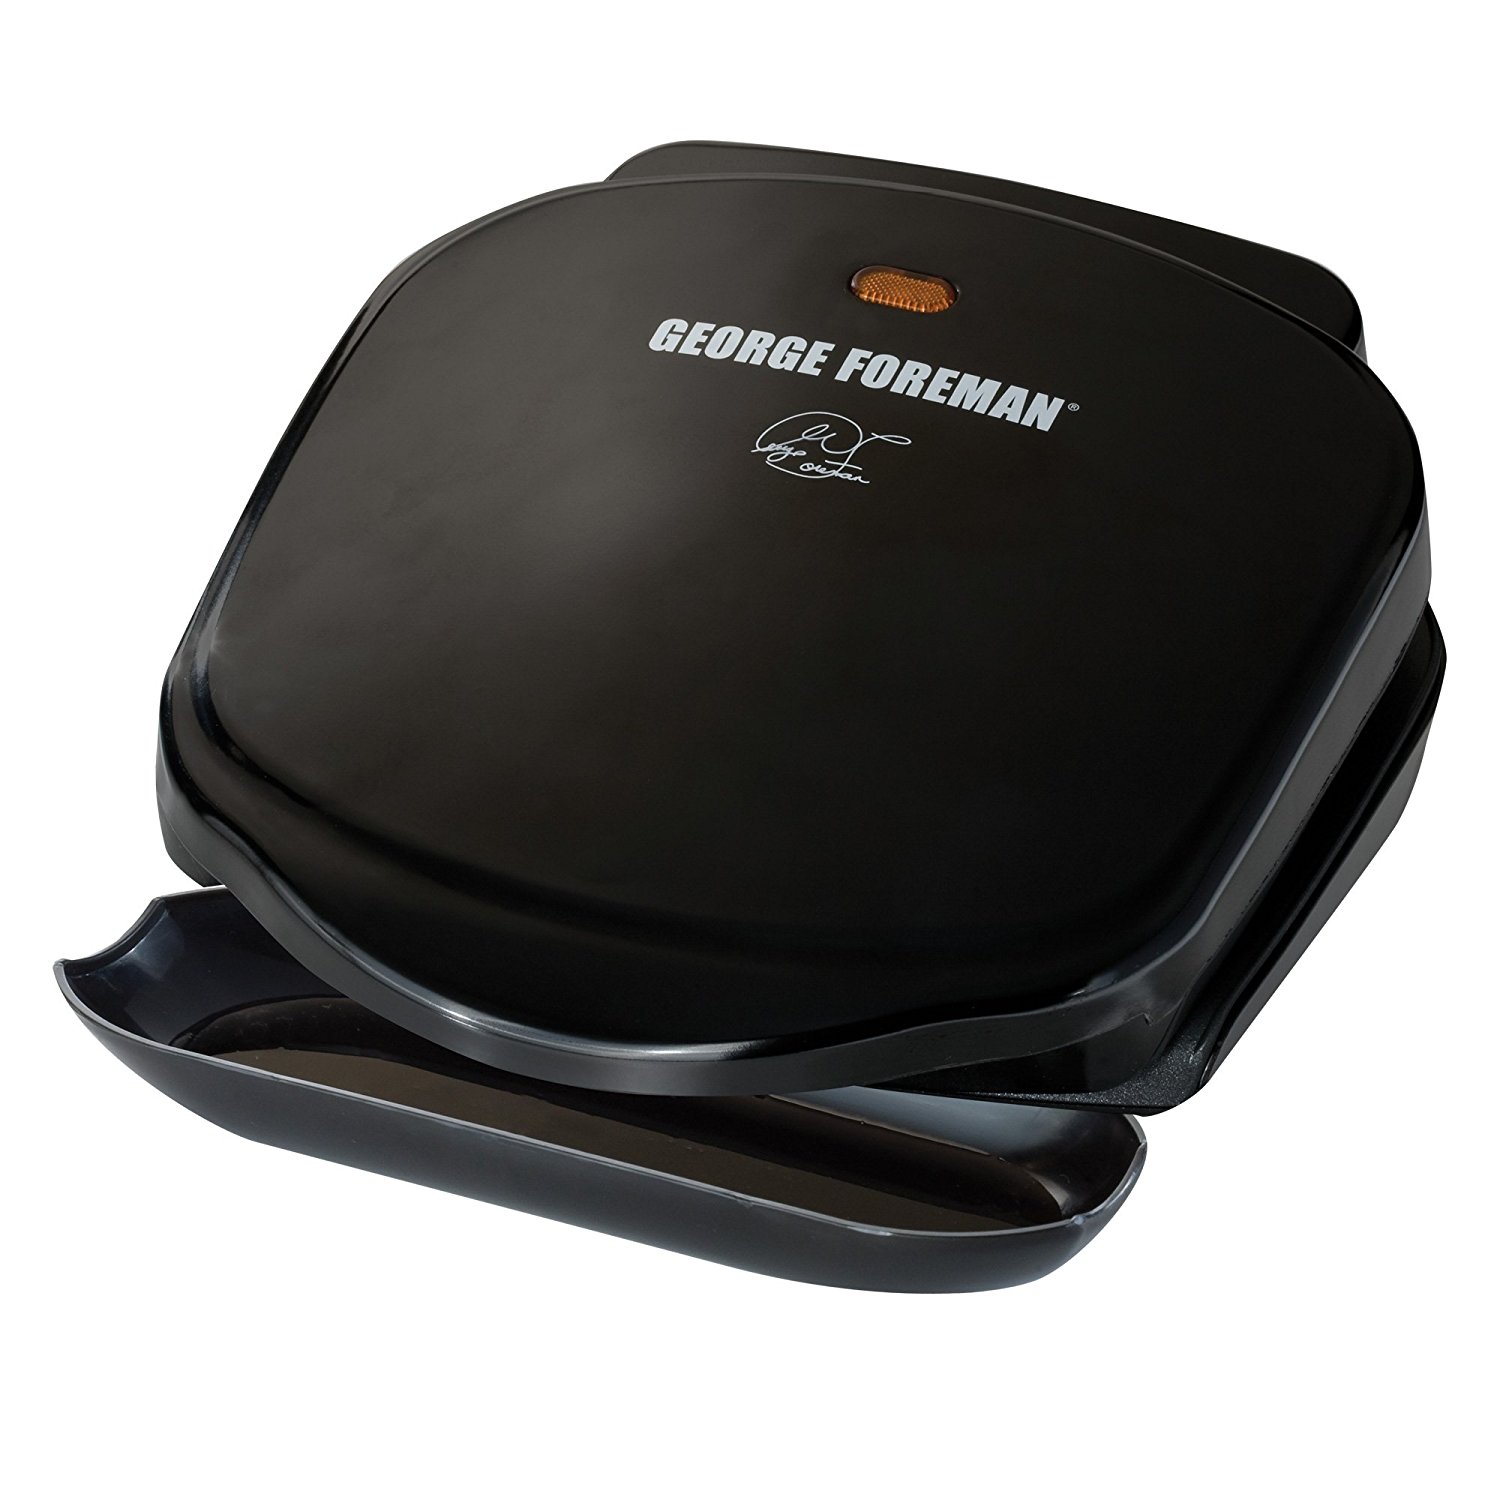 How Long Does It Take For A George Foreman Grill To Heat Up